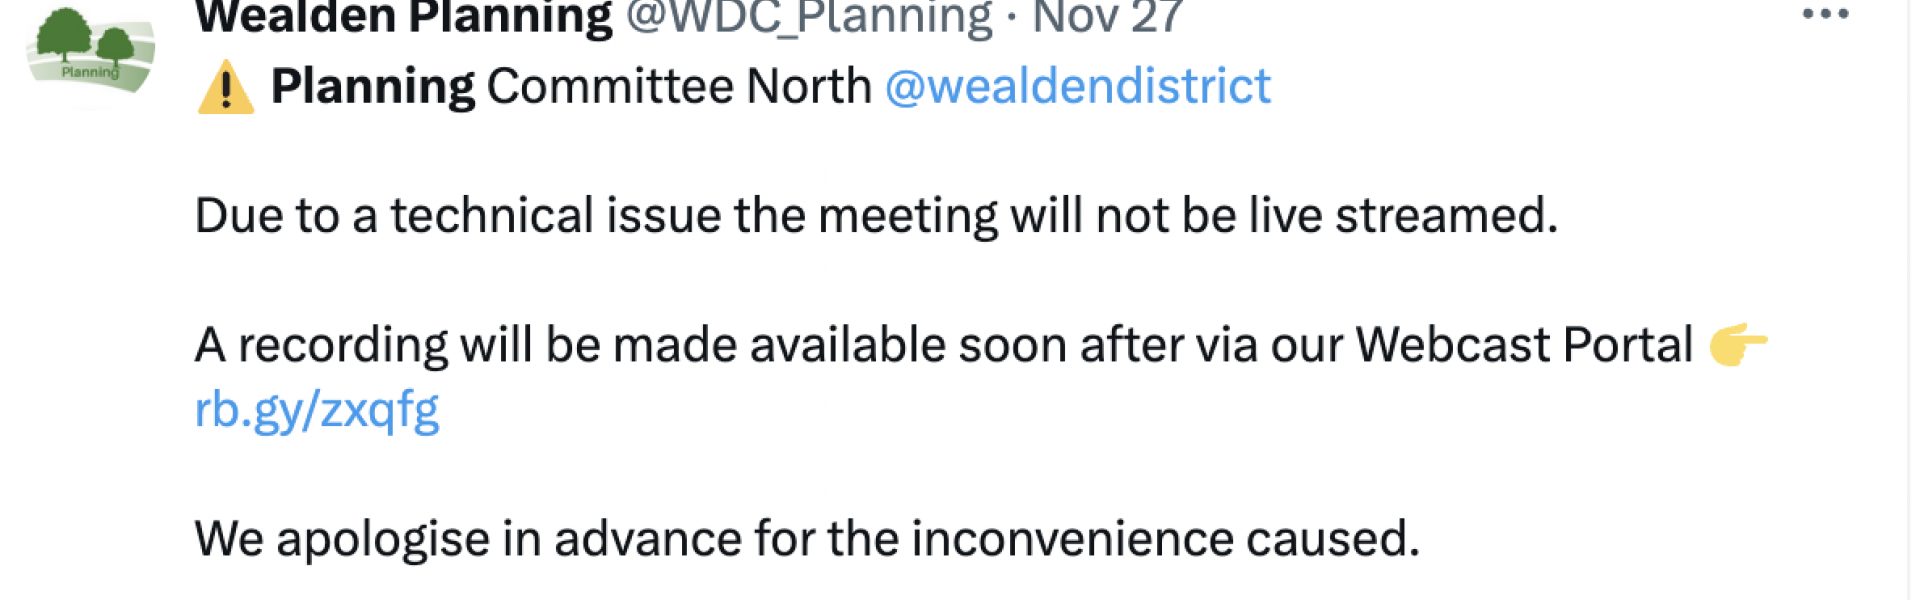 Council meeting blacked out by ongoing technical issues at Green/Lib Dem-run Wealden